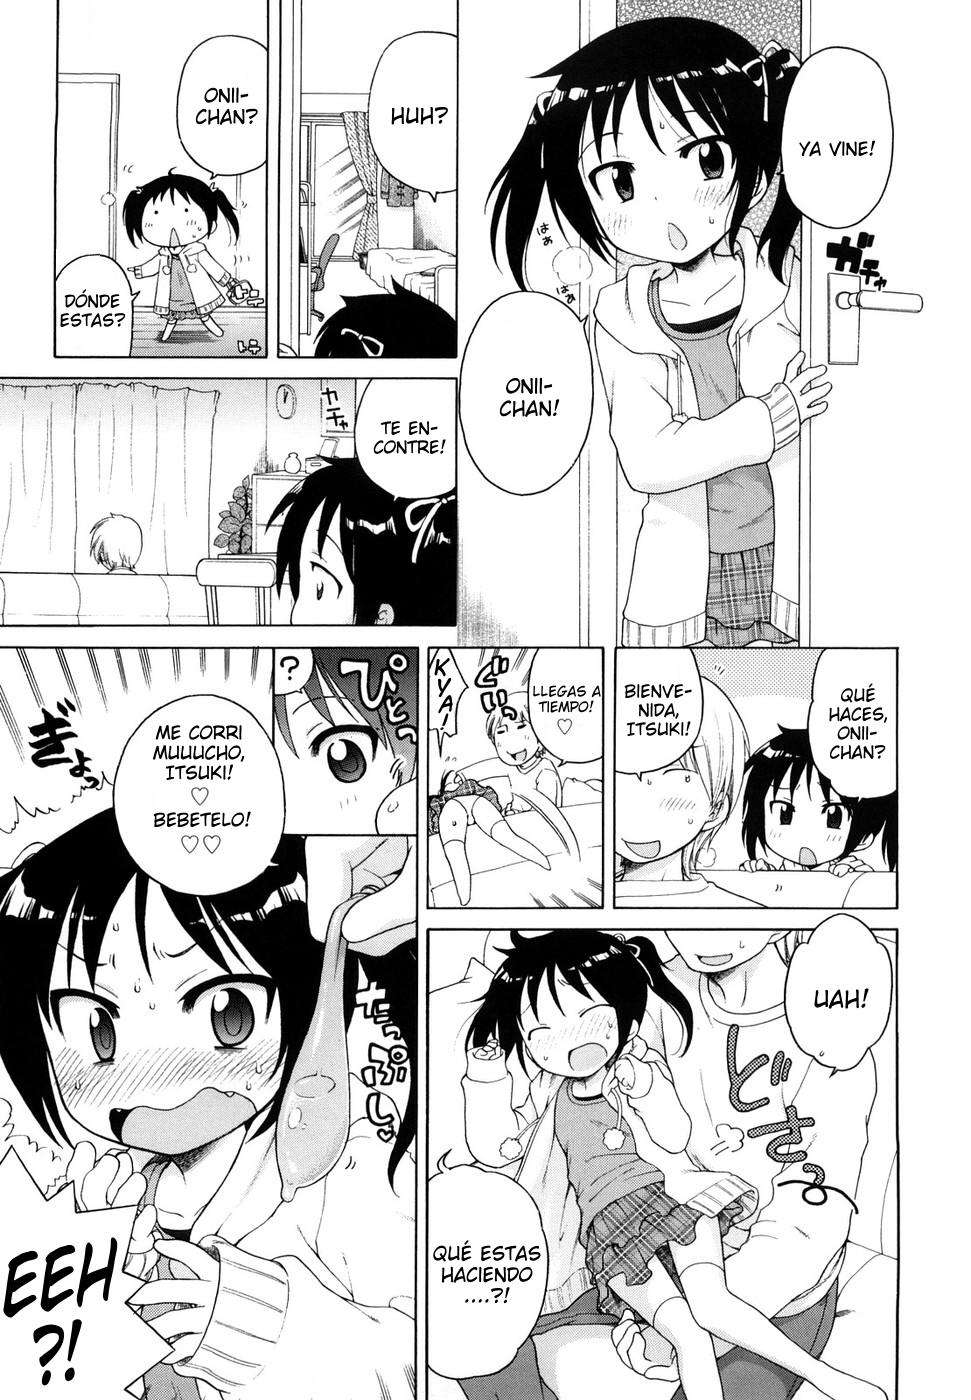 Me gustas Onii-chan! Chapter-5 - 6